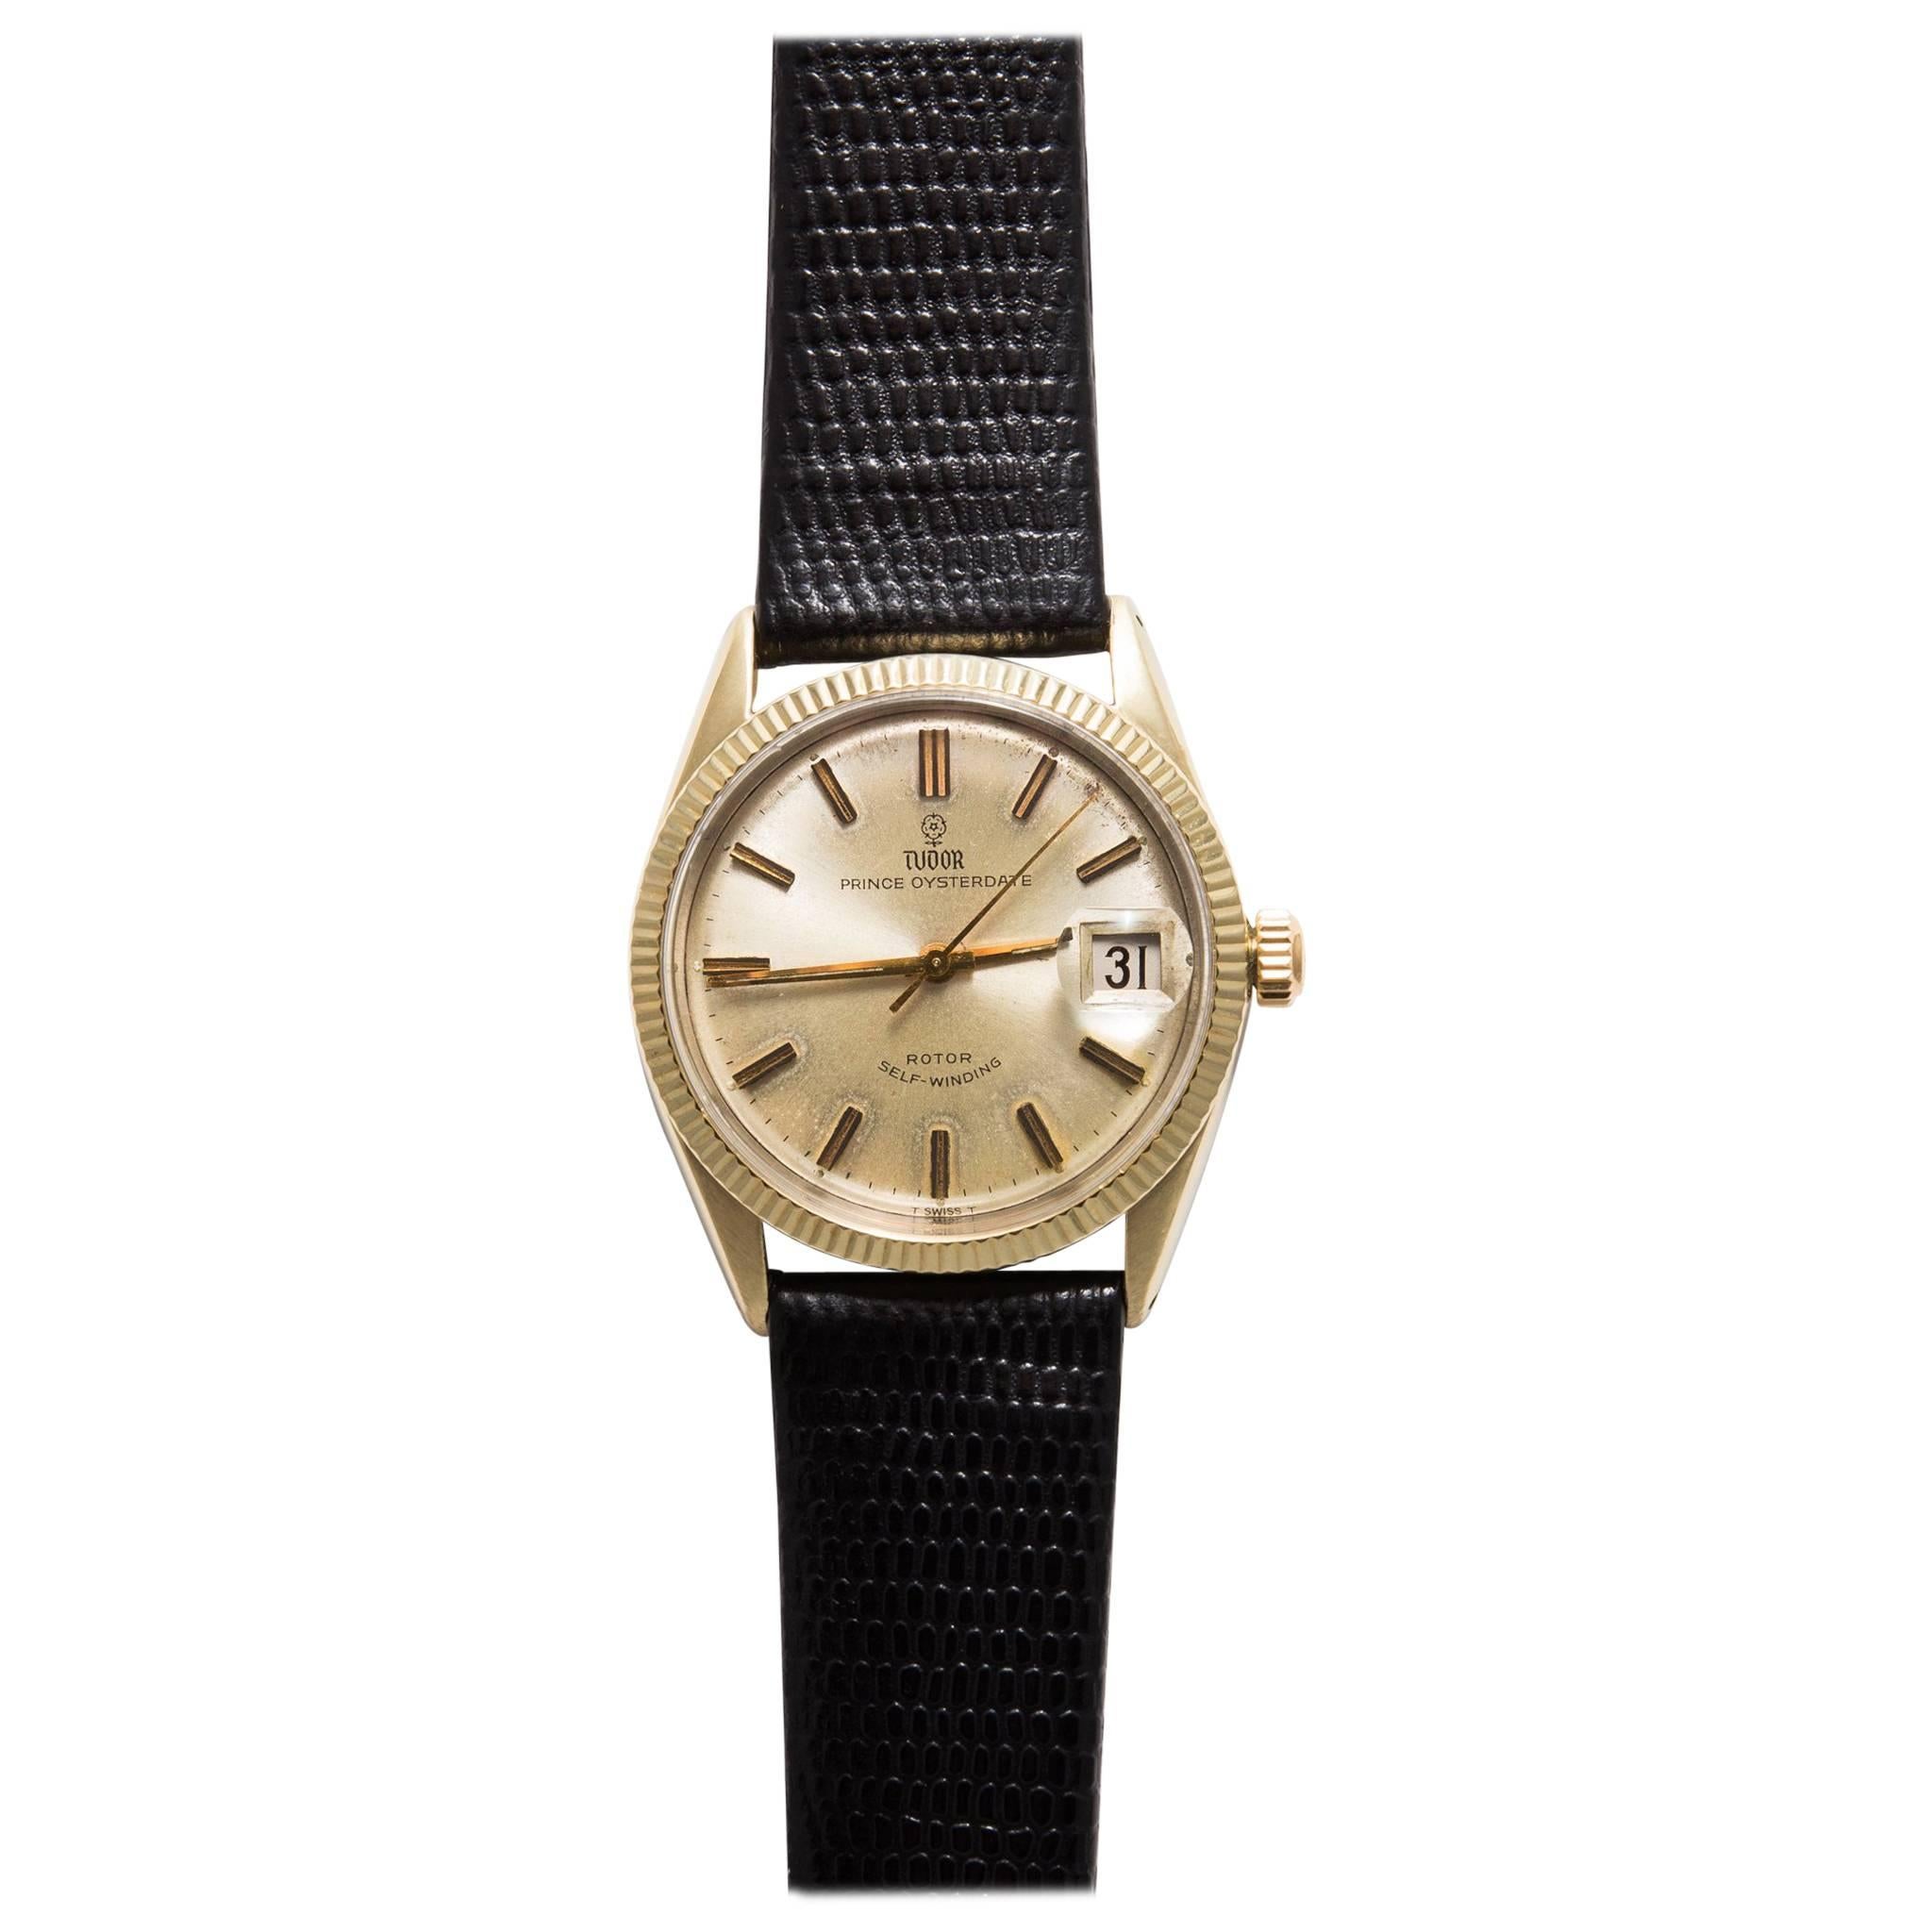 Rolex Tudor Yellow Gold Stainless Steel Automatic Wristwatch, 1960s